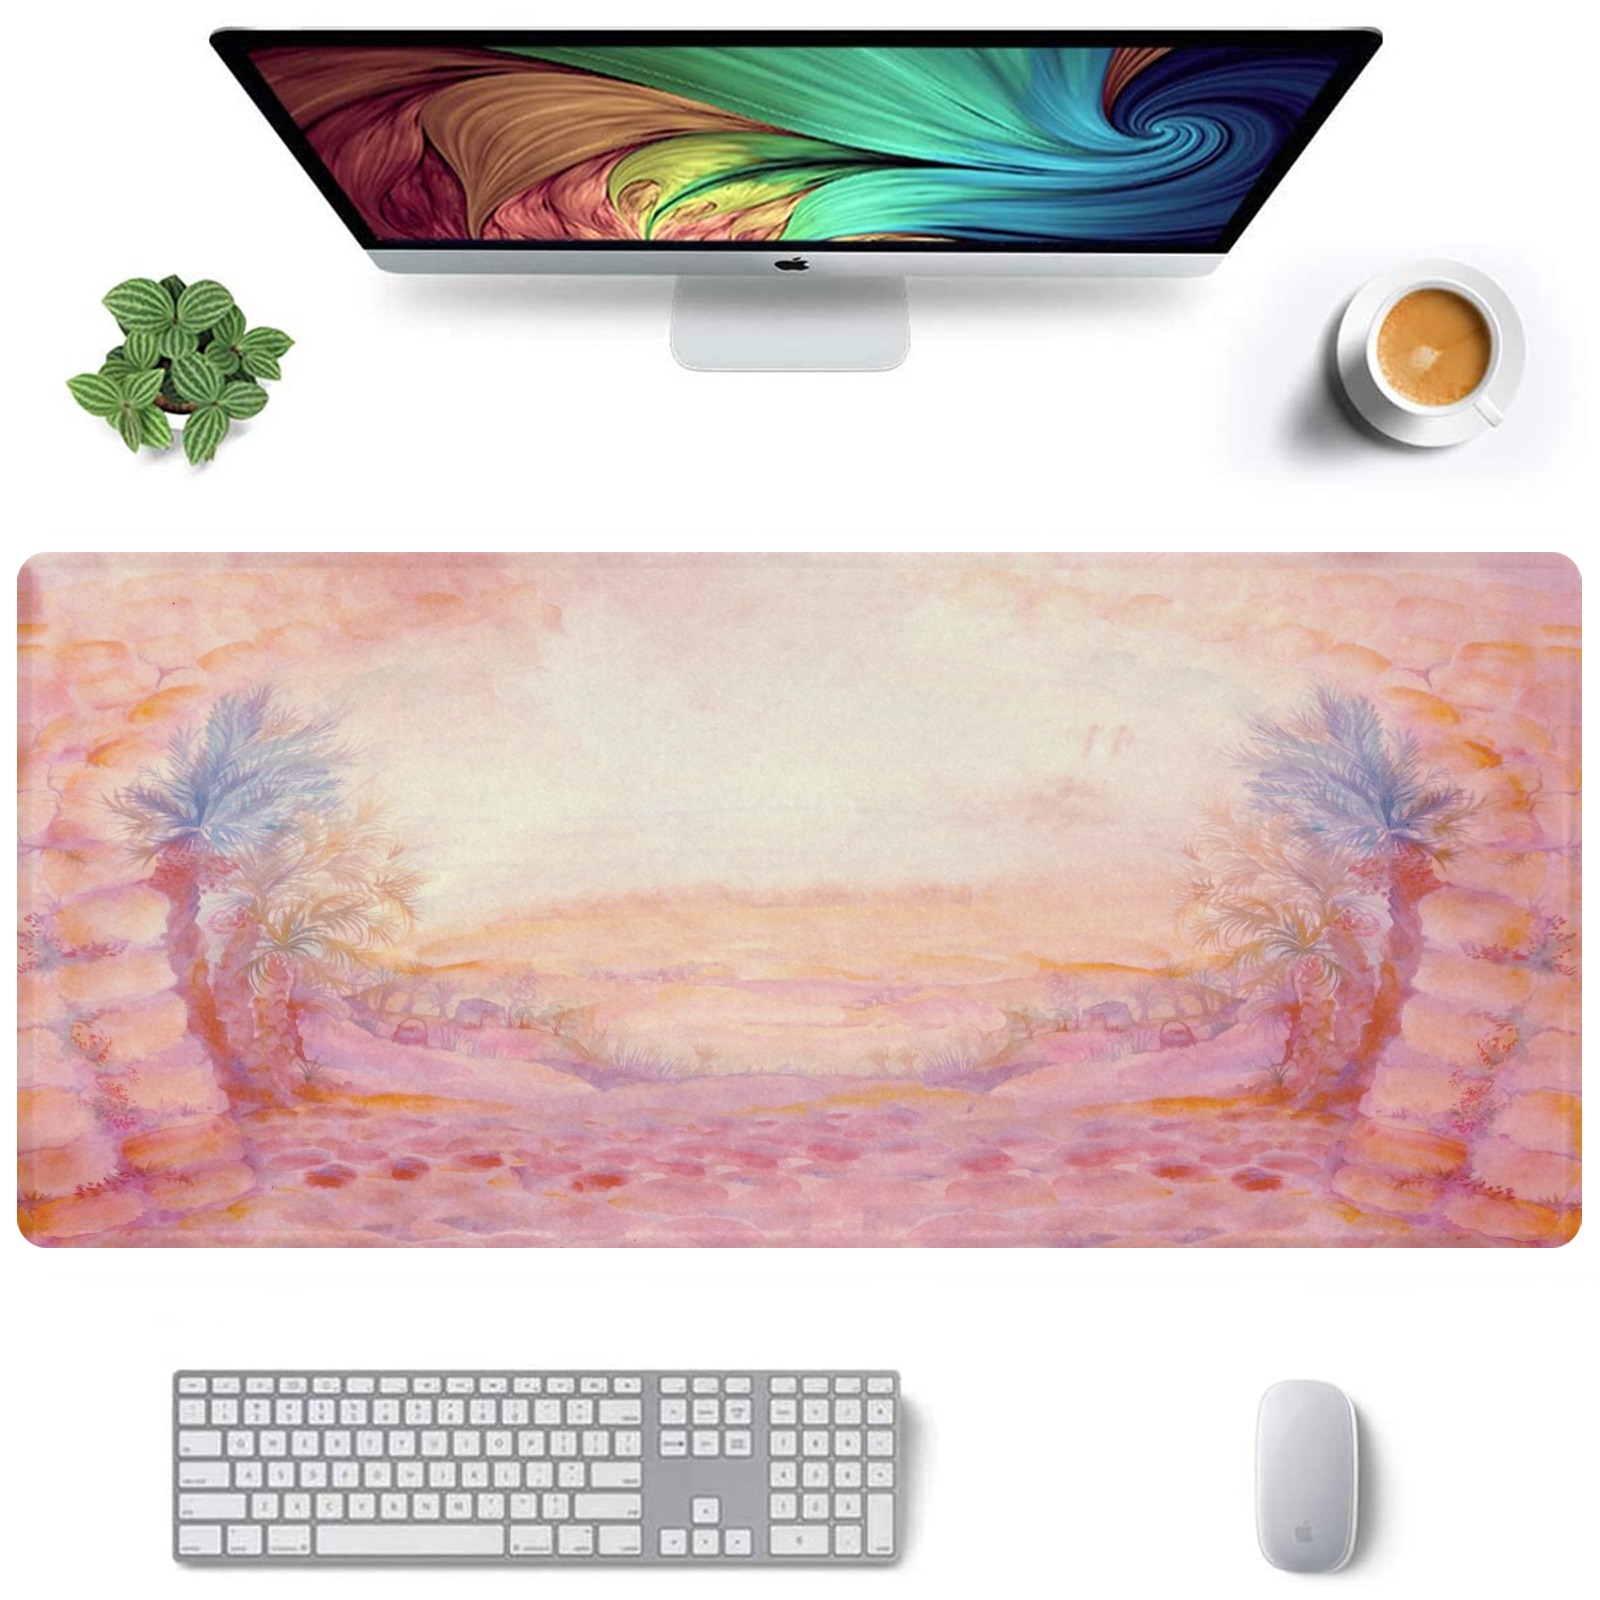 desert2-35x16 inches Gaming Mousepad (35"x16")